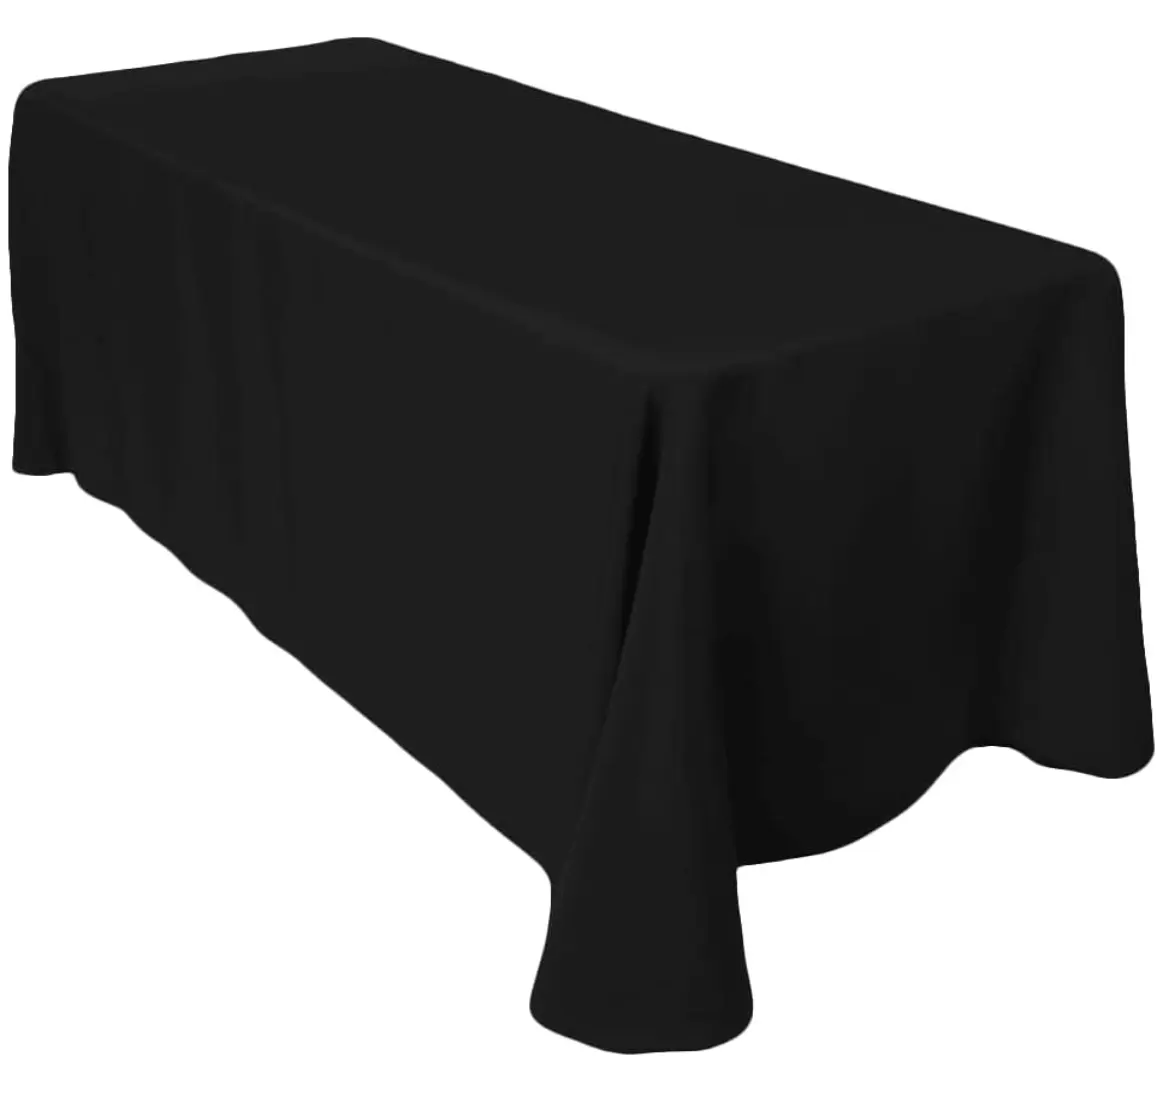 Custom Black Table Cover Wedding Event Rectangle Table Cloth Spun Polyester Waterproof Elegant Decore Party Fabric Tablecloth